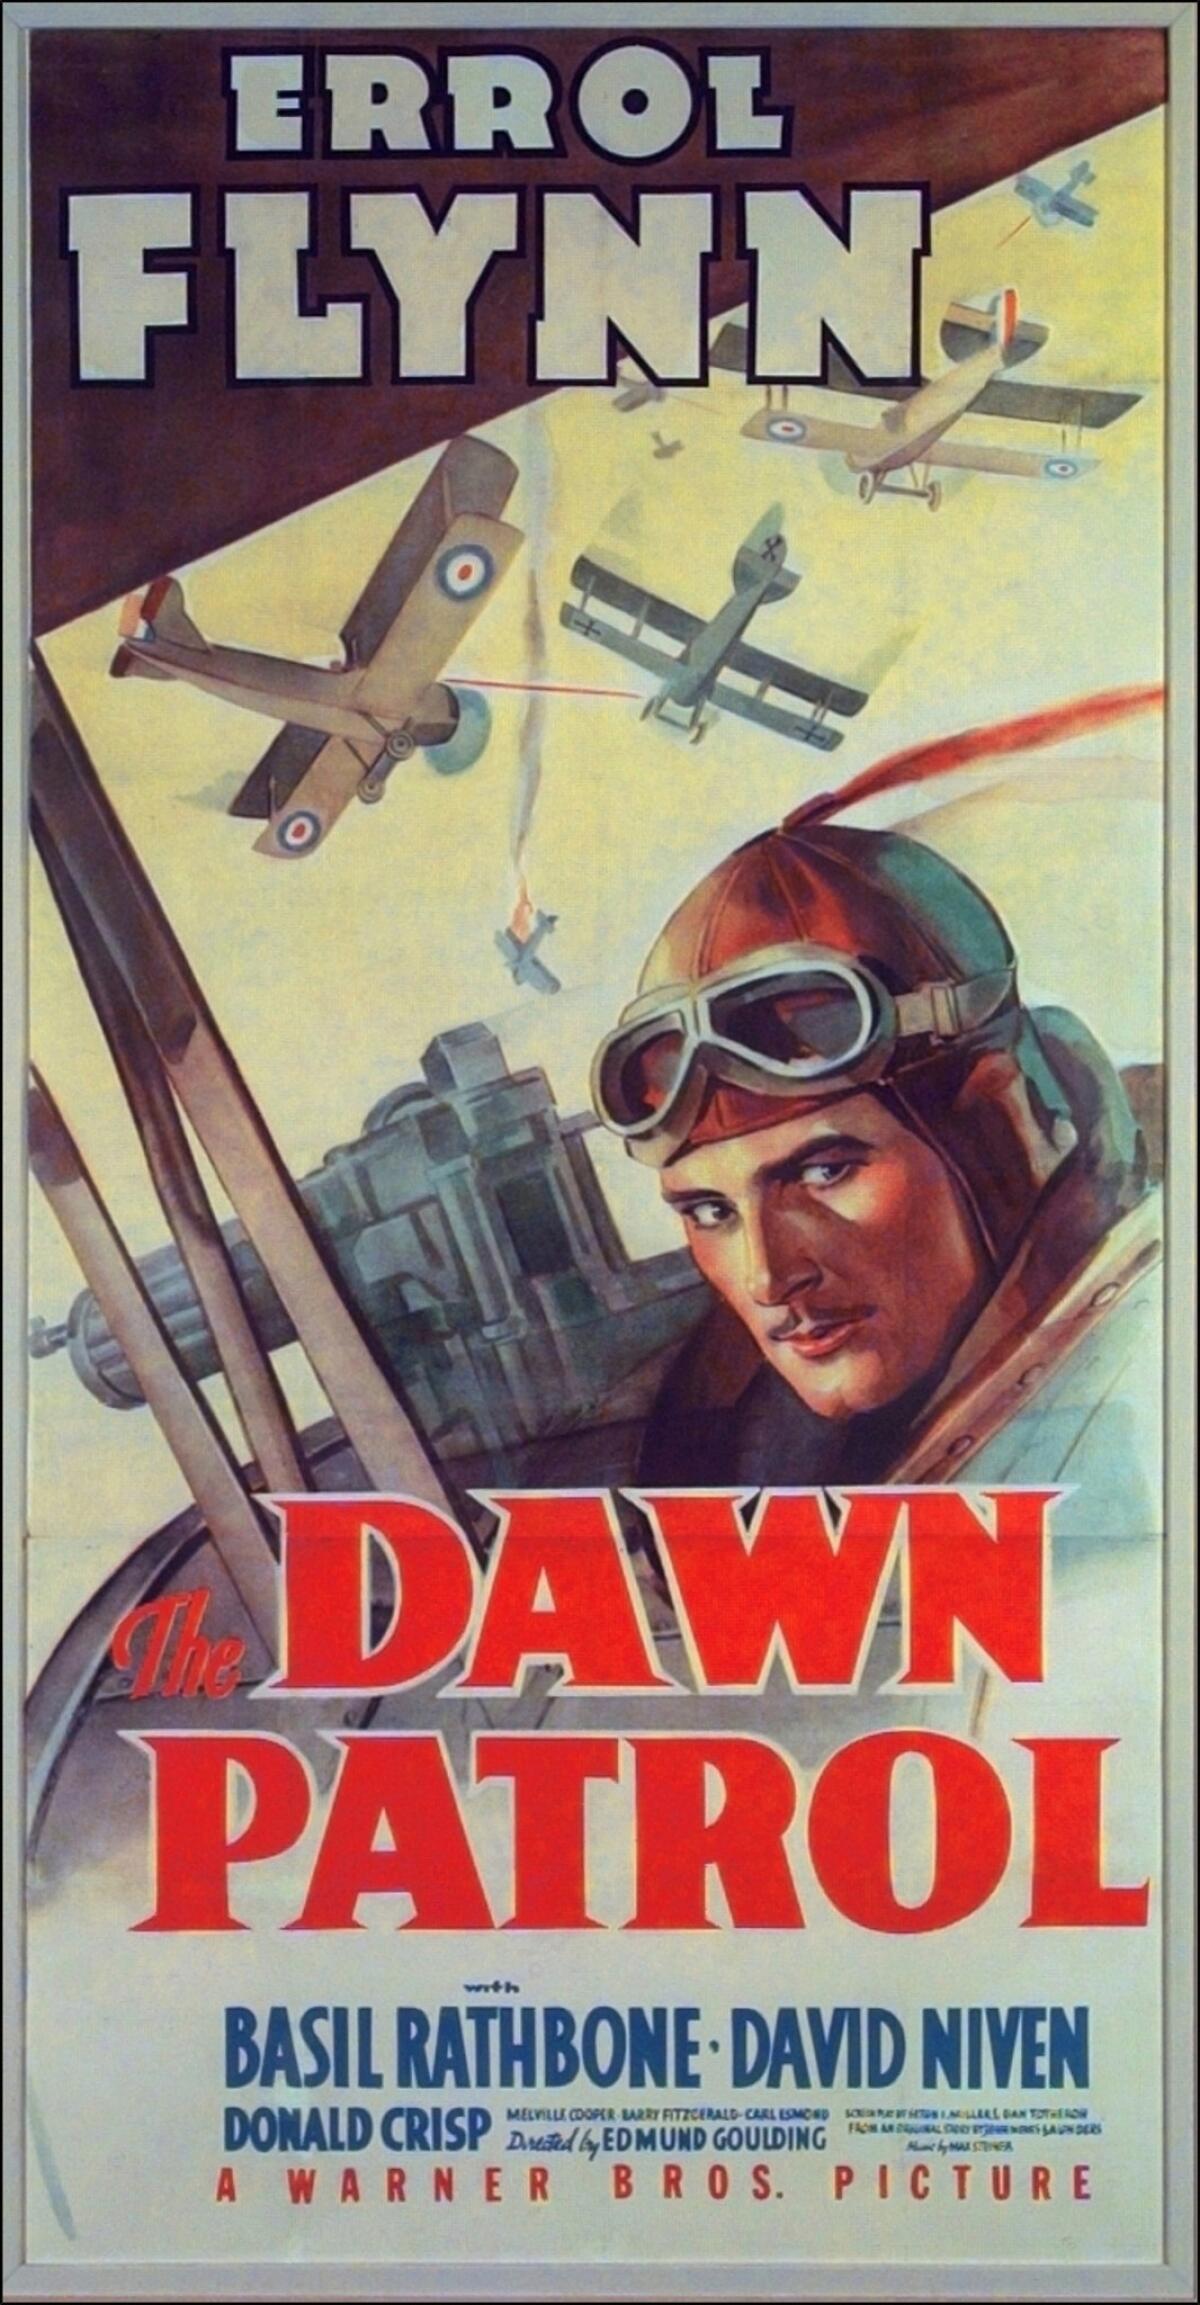 The poster for the 1938 film "The Dawn Patrol."